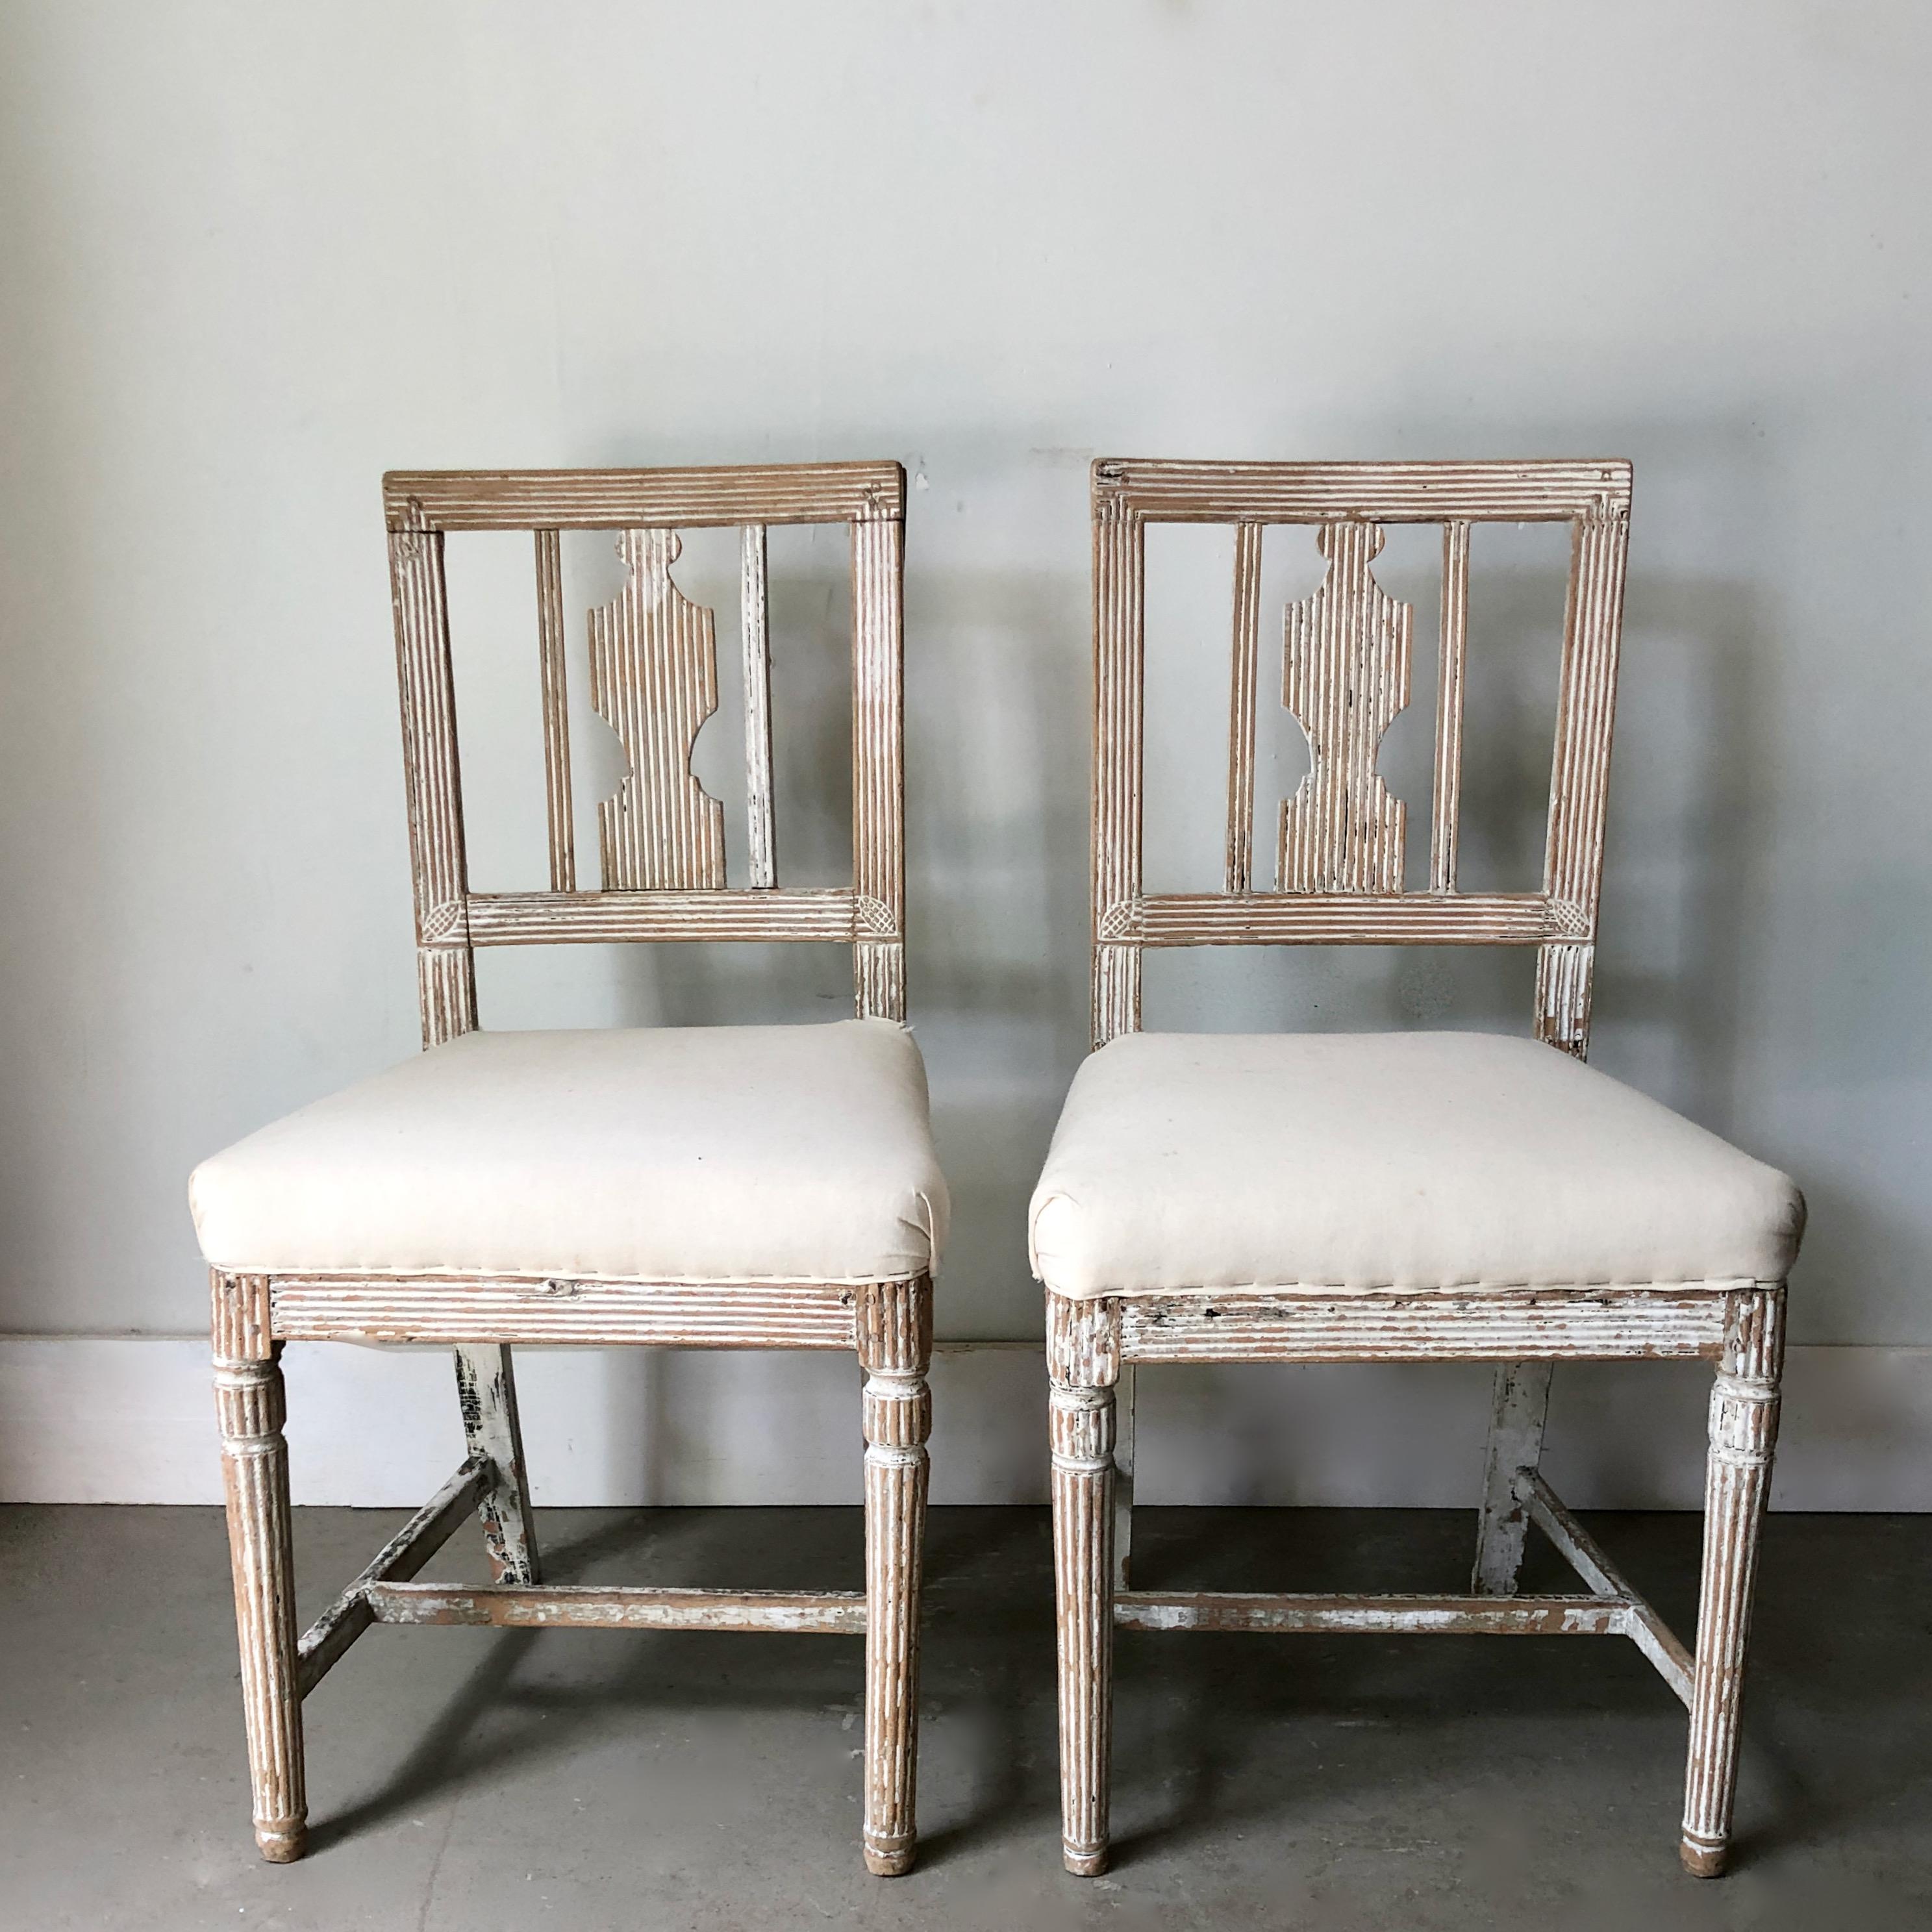 Hand-Carved Pair of 19th Century Swedish Gustavian Period Side Chairs